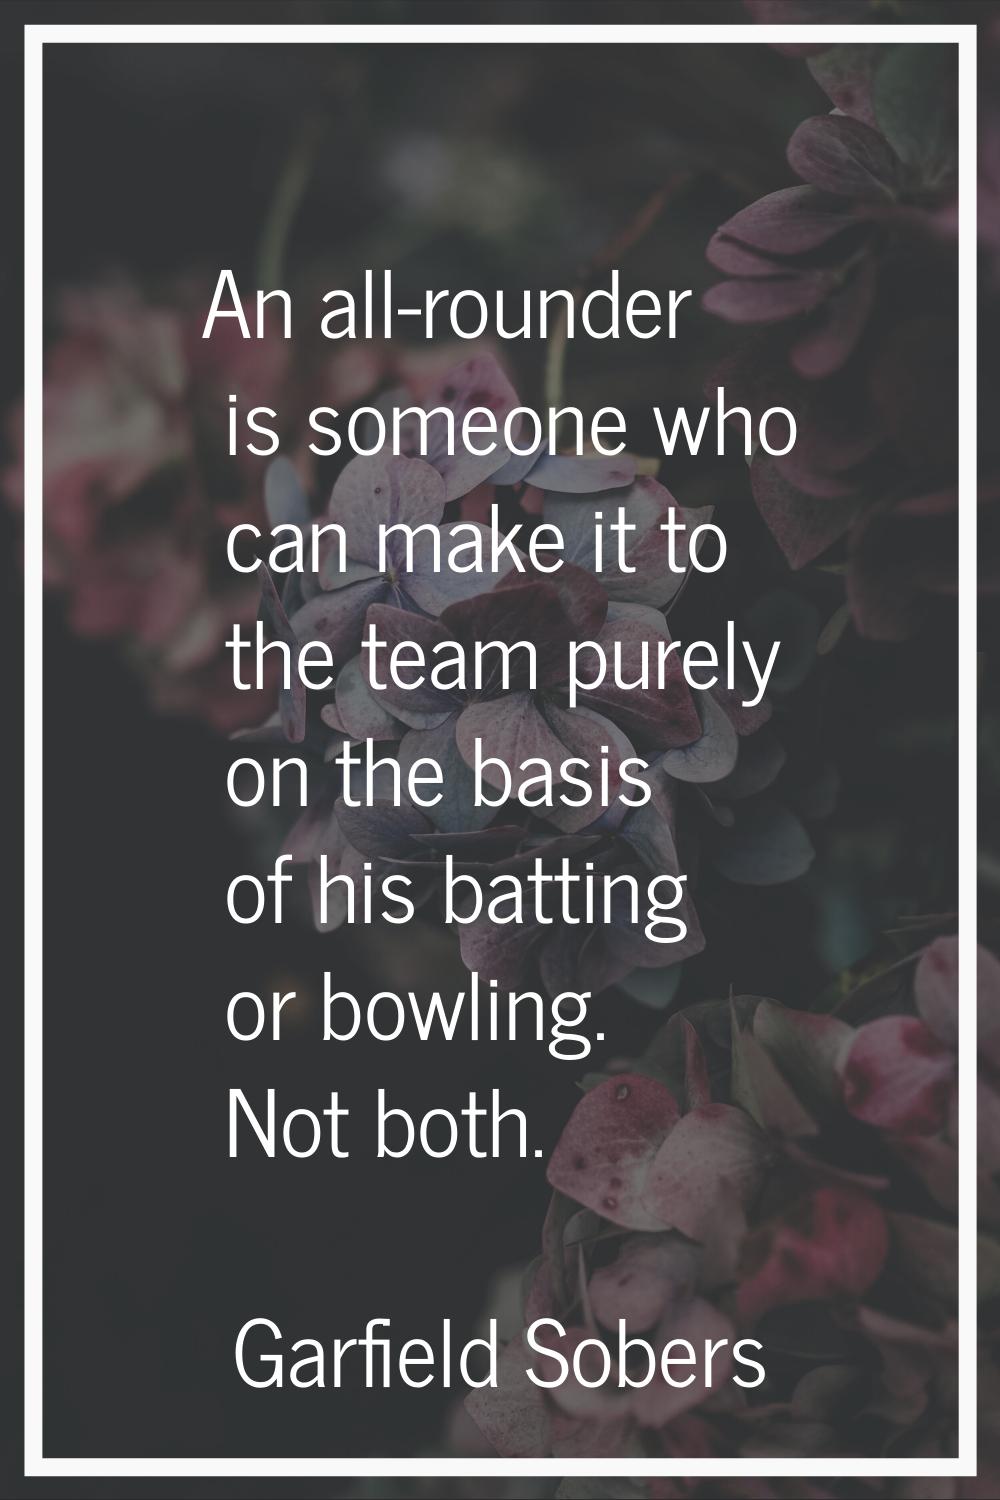 An all-rounder is someone who can make it to the team purely on the basis of his batting or bowling